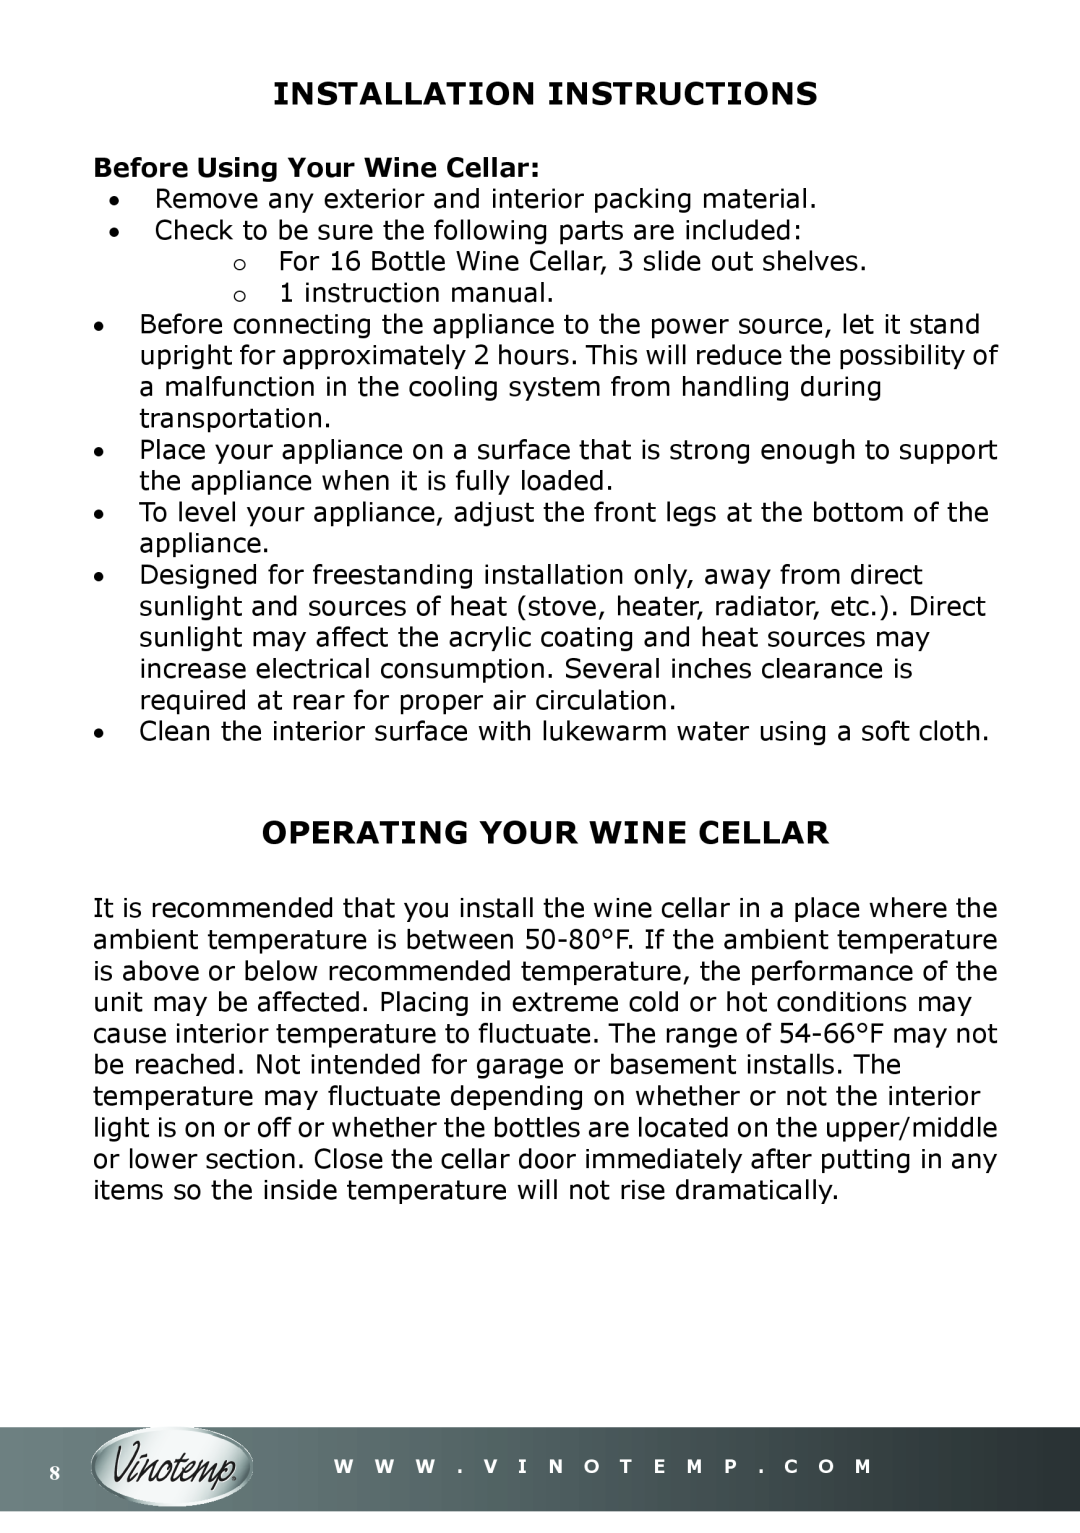 Vinotemp VT-16TEDS owner manual Installation Instructions, Operating Your Wine Cellar, Before Using Your Wine Cellar 